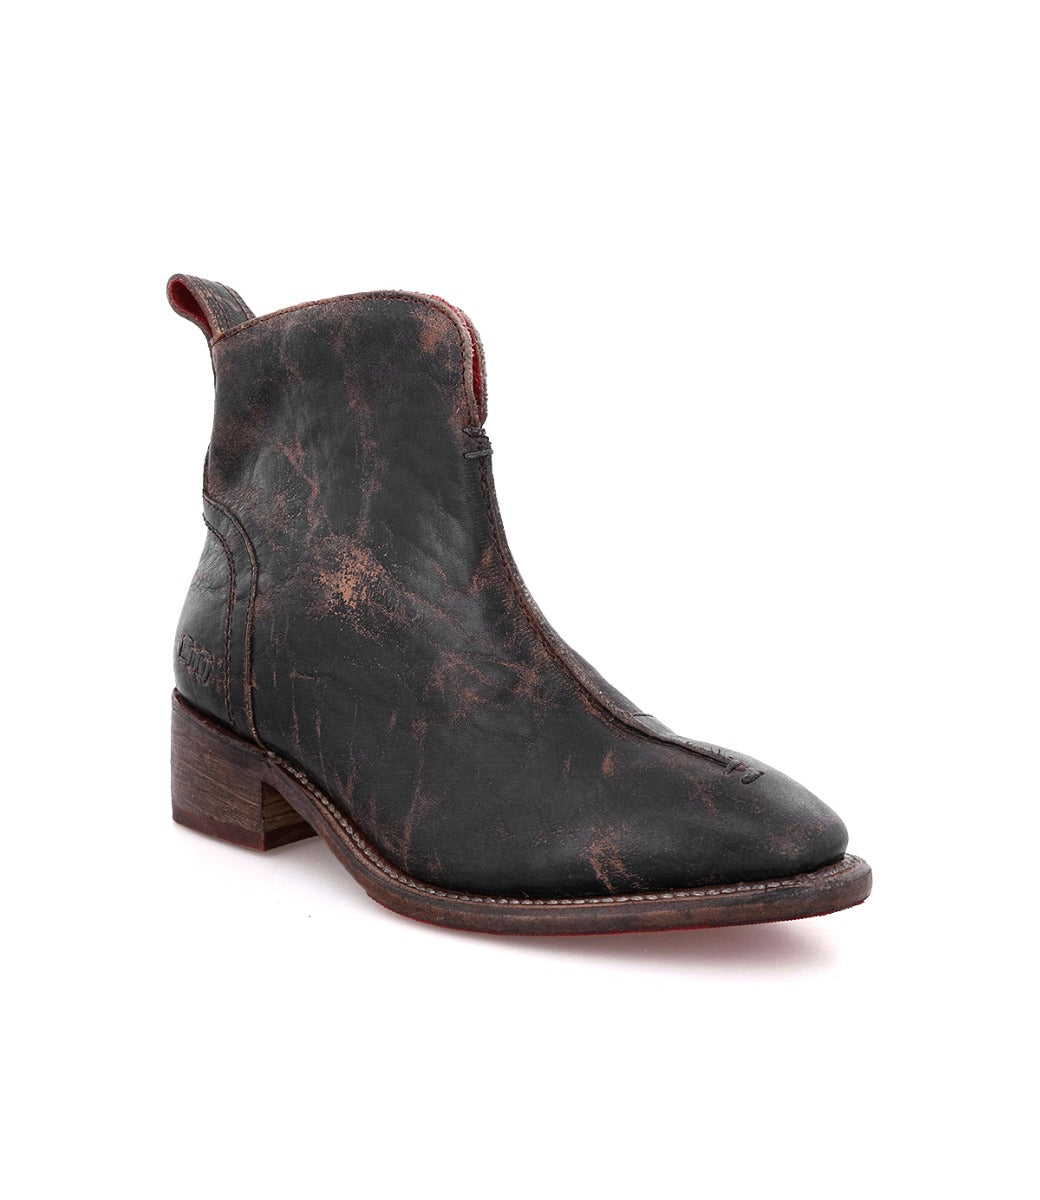 A black leather Tabitha ankle boot with a brown sole by Bed Stu.